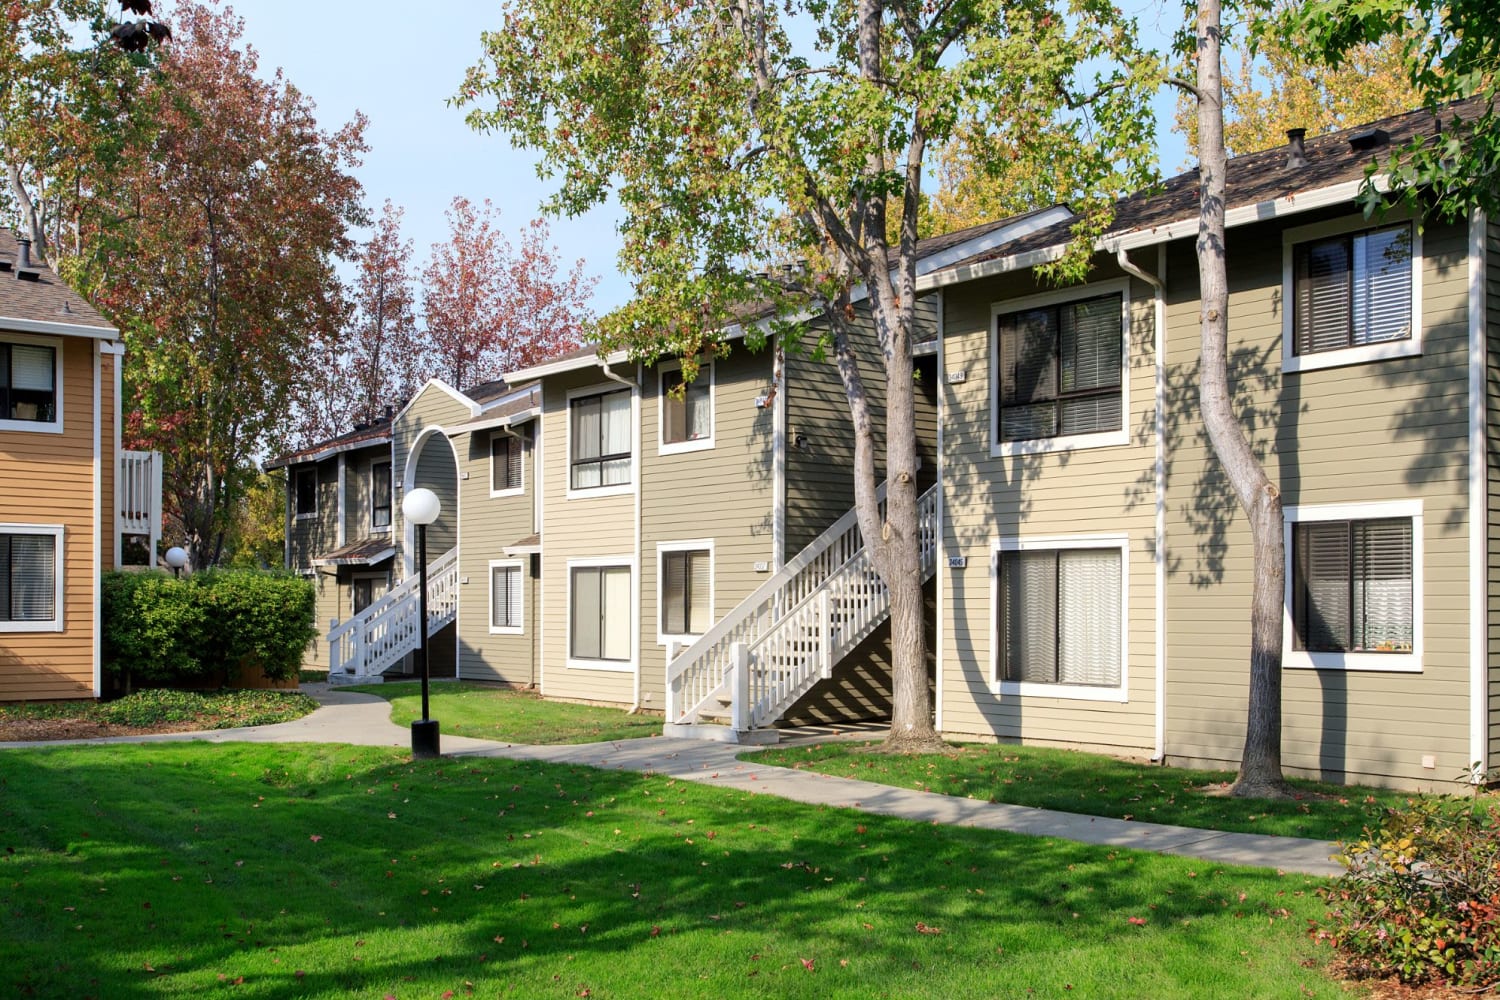 View of the housing and trees at Amber Court in Fremont, California